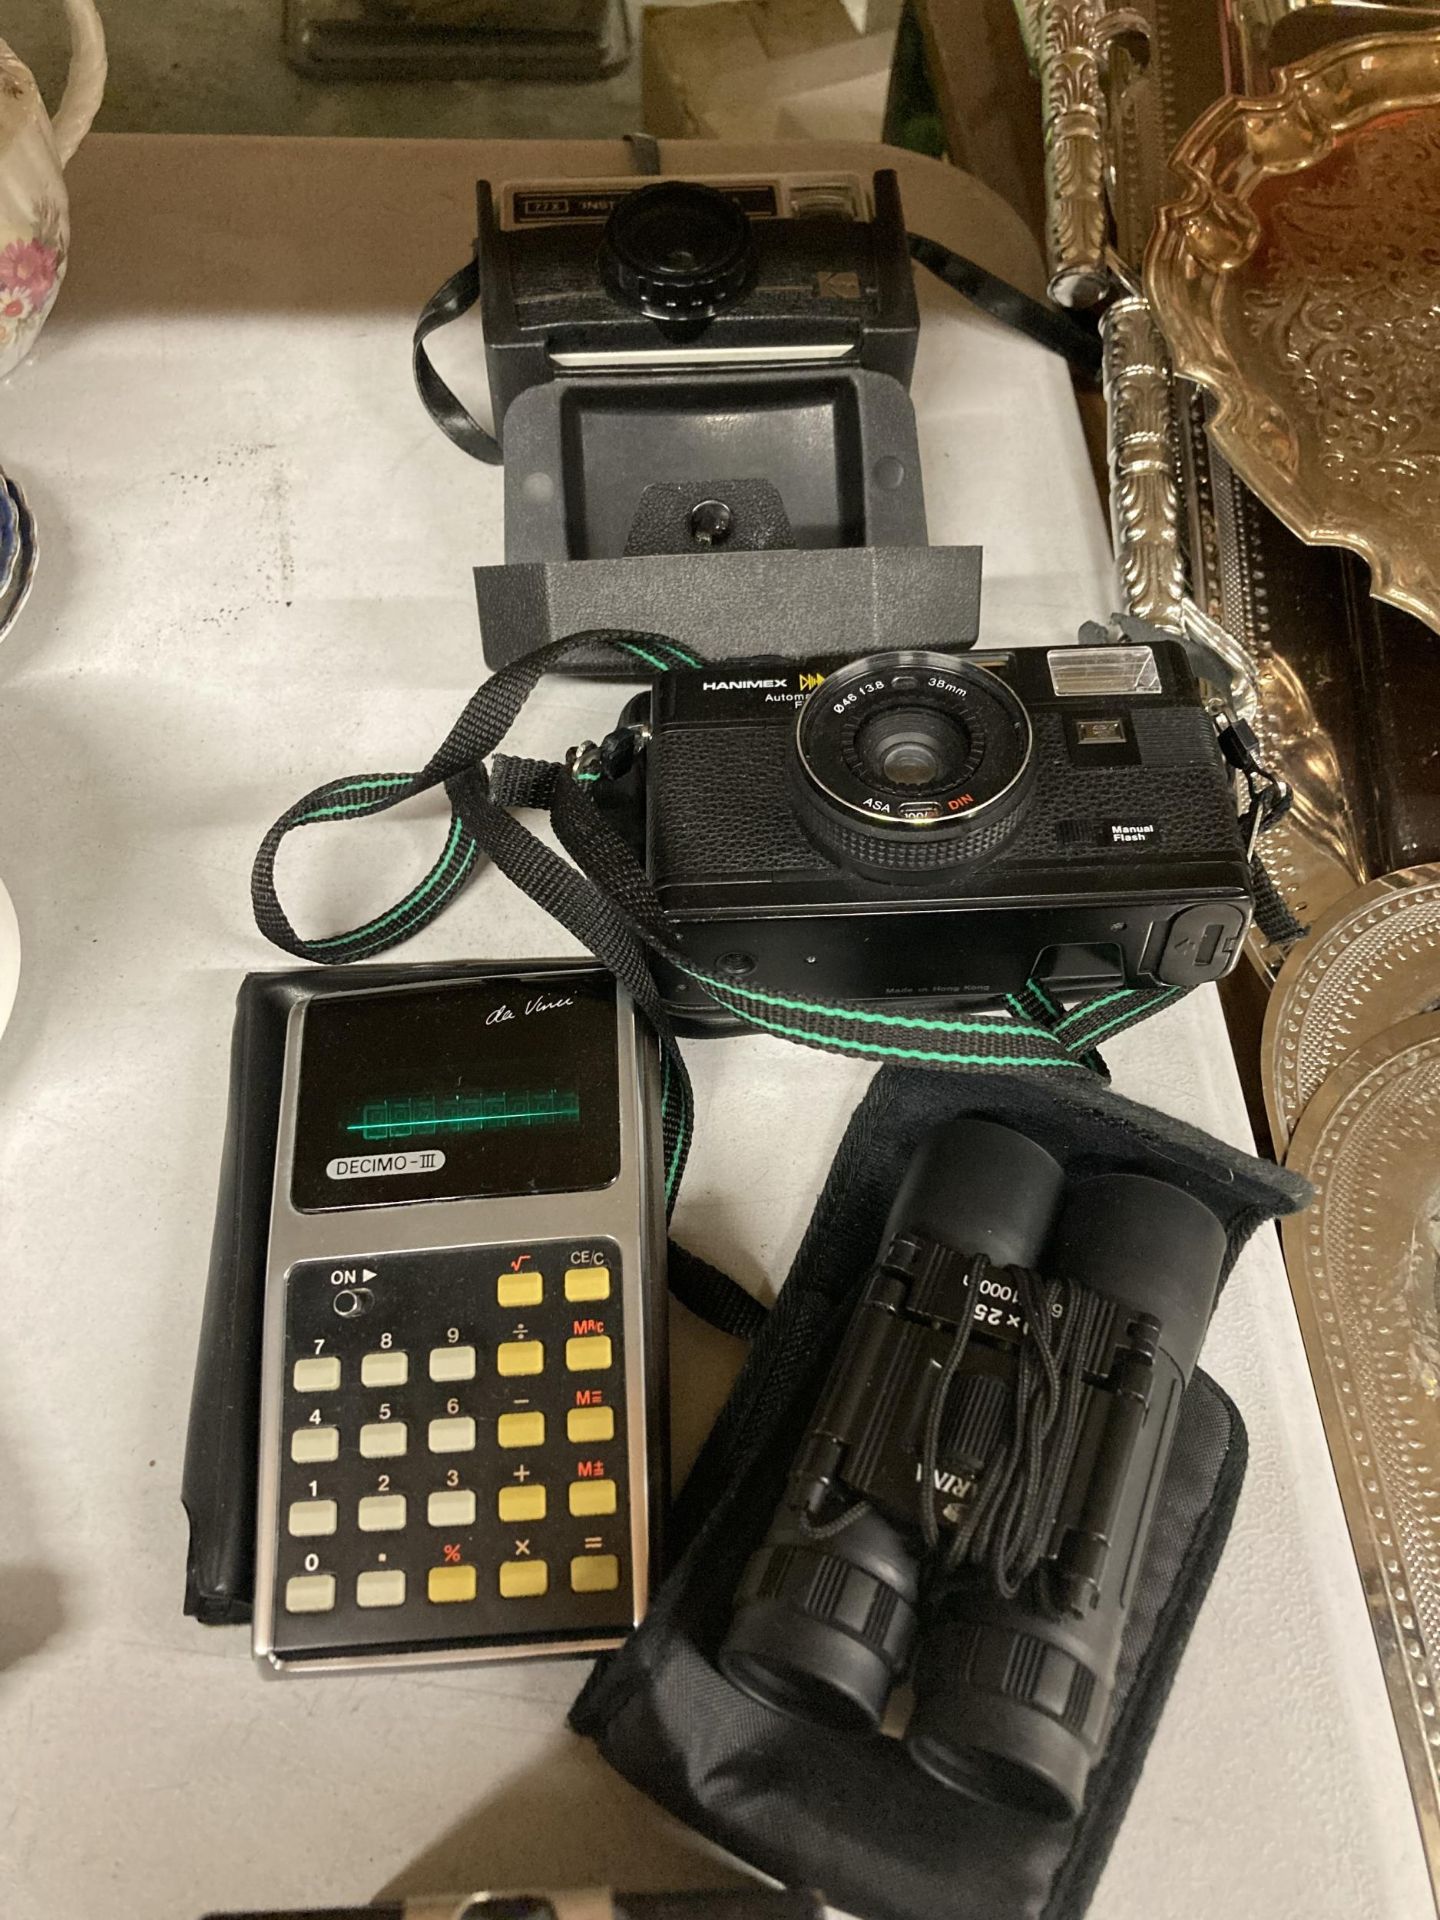 THREE VINTAGE CAMERAS, A PAIR OF BINOCULARS AND A CALCULATOR - Image 2 of 4